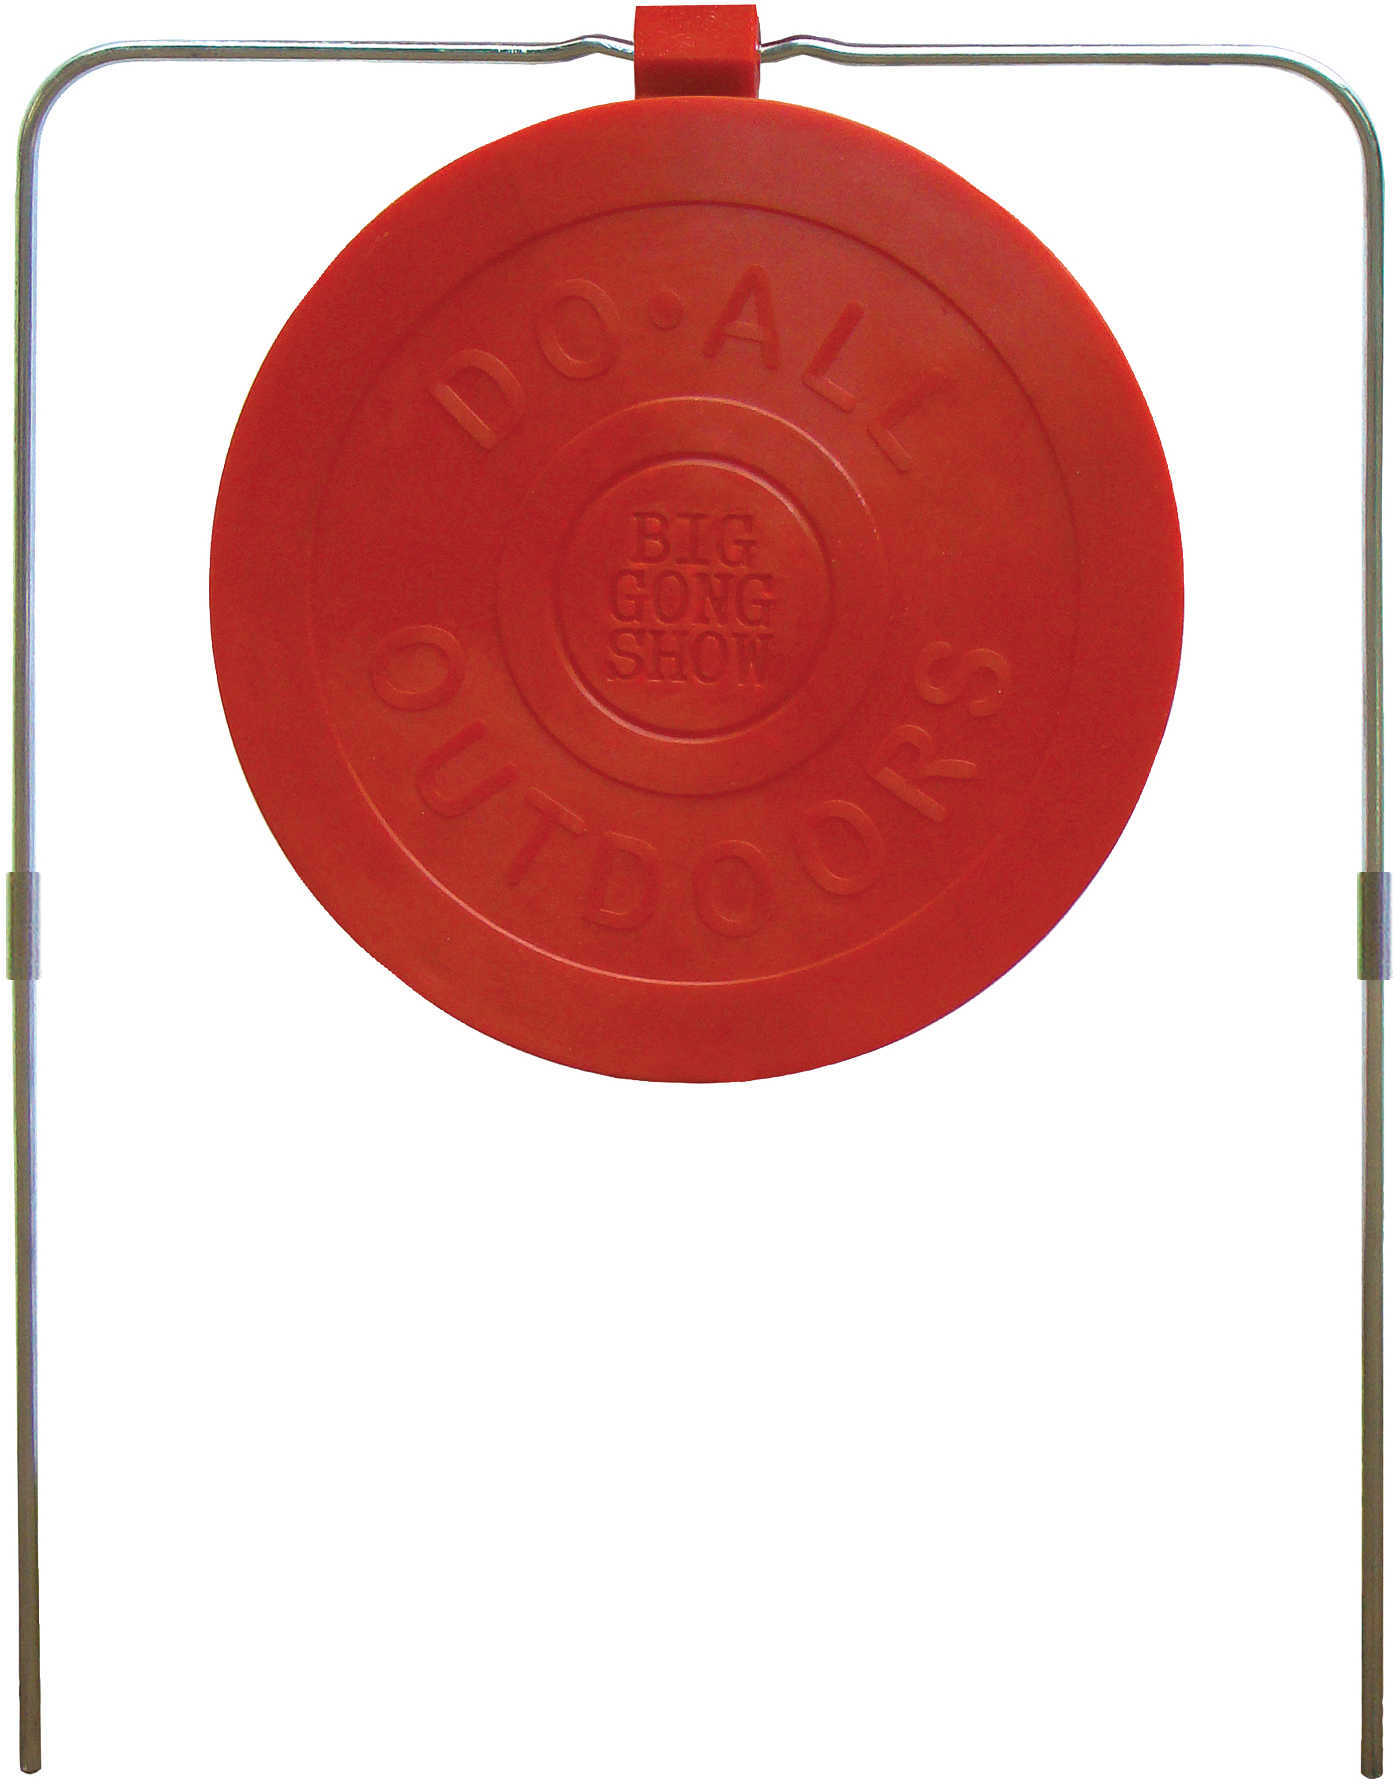 Do-All Traps Big Gong Show Impact Seal Hanging Target